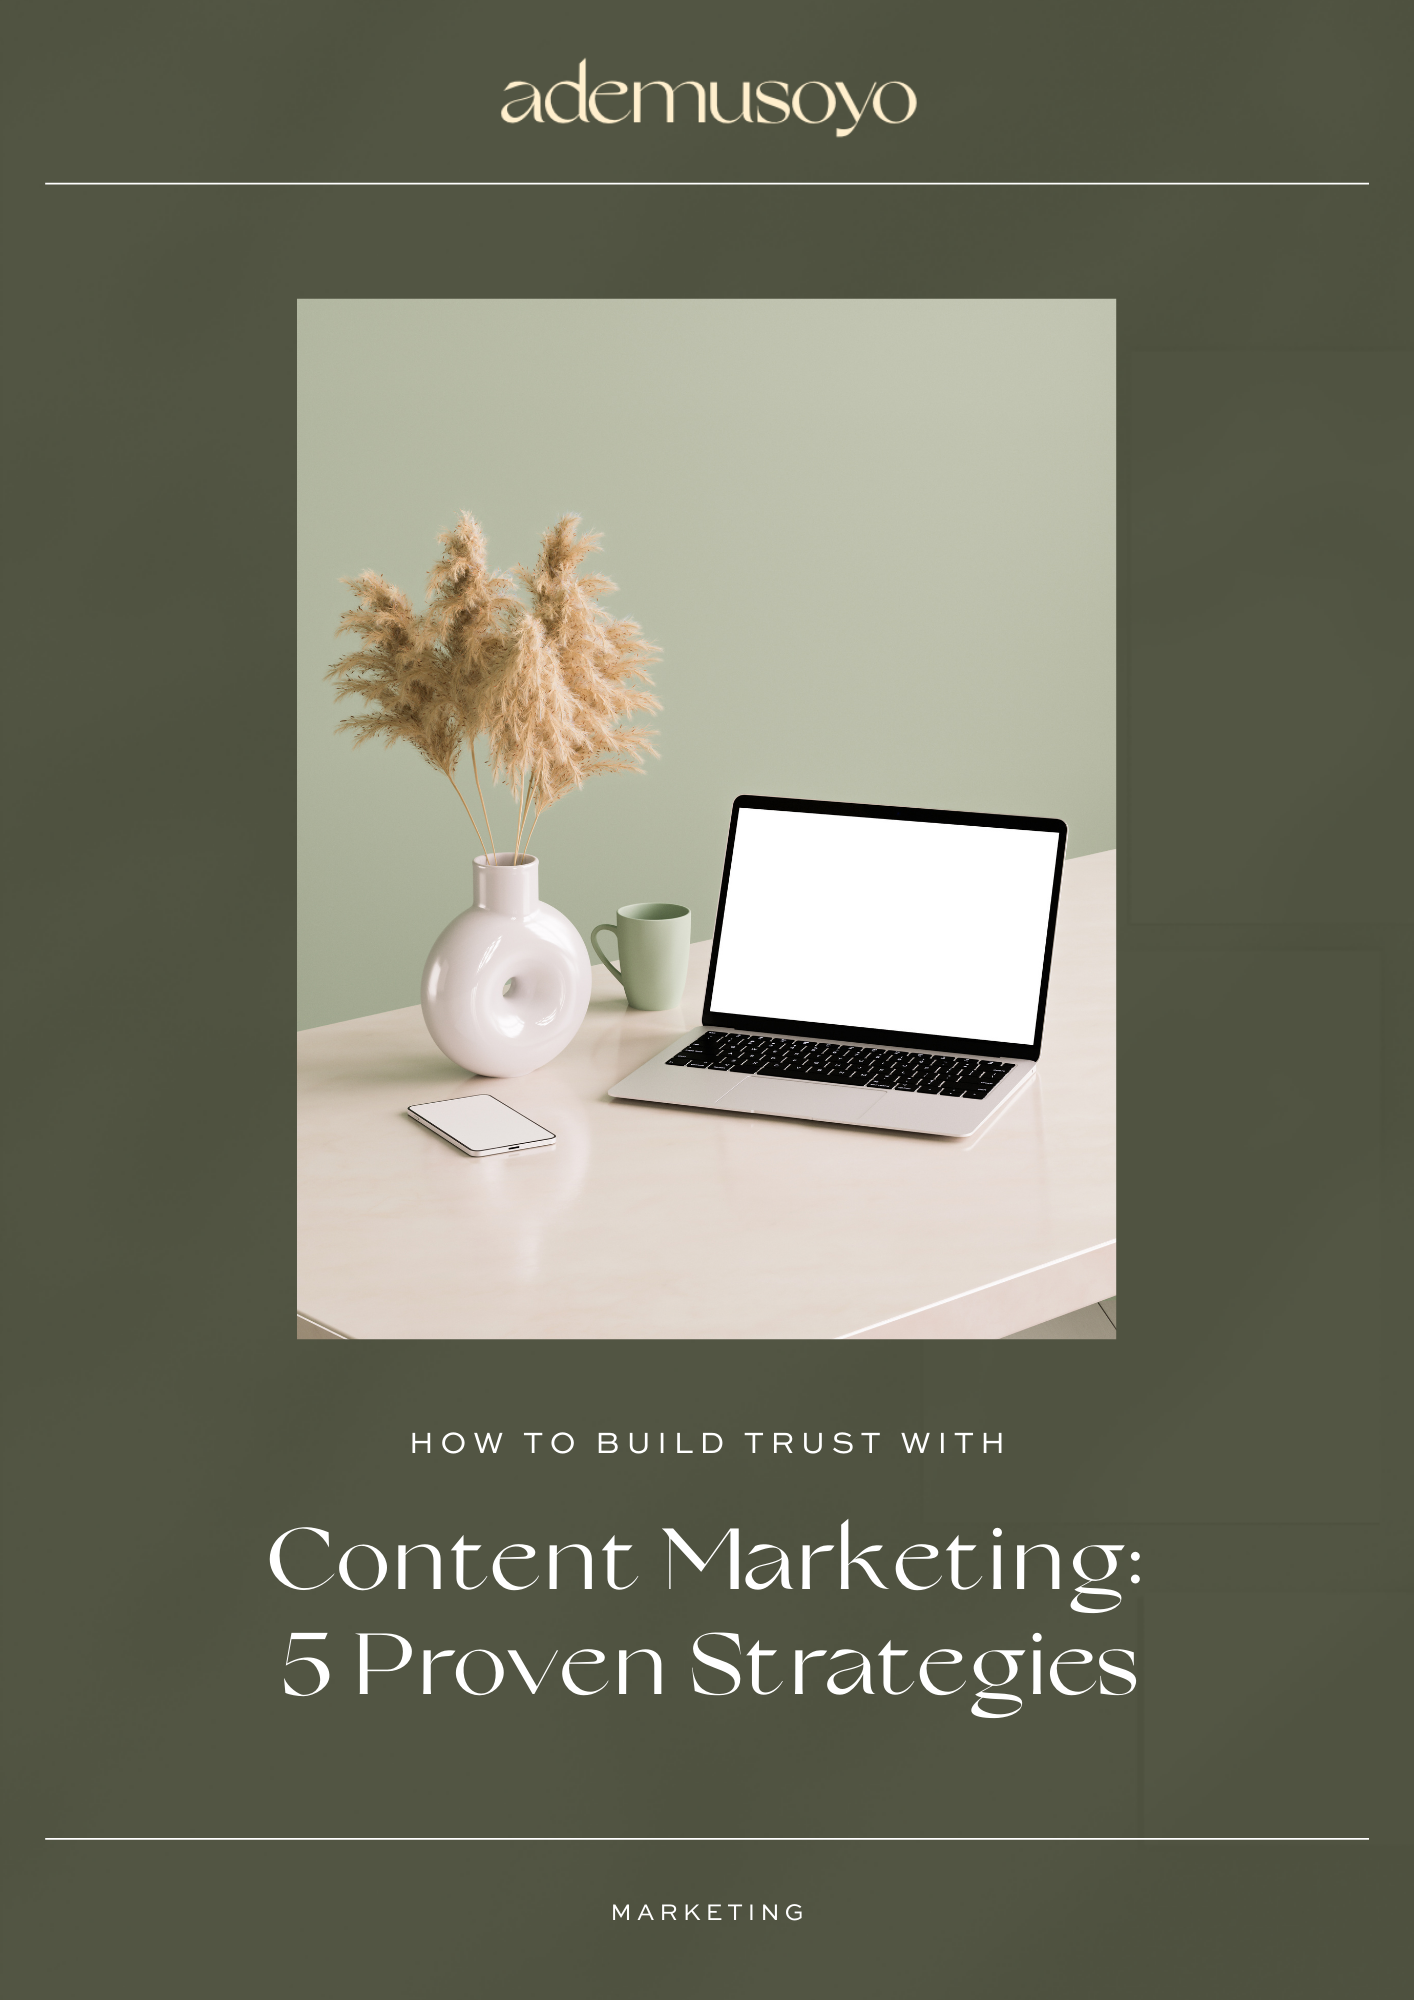 How to Build Trust With Content Marketing – 5 Proven Strategies